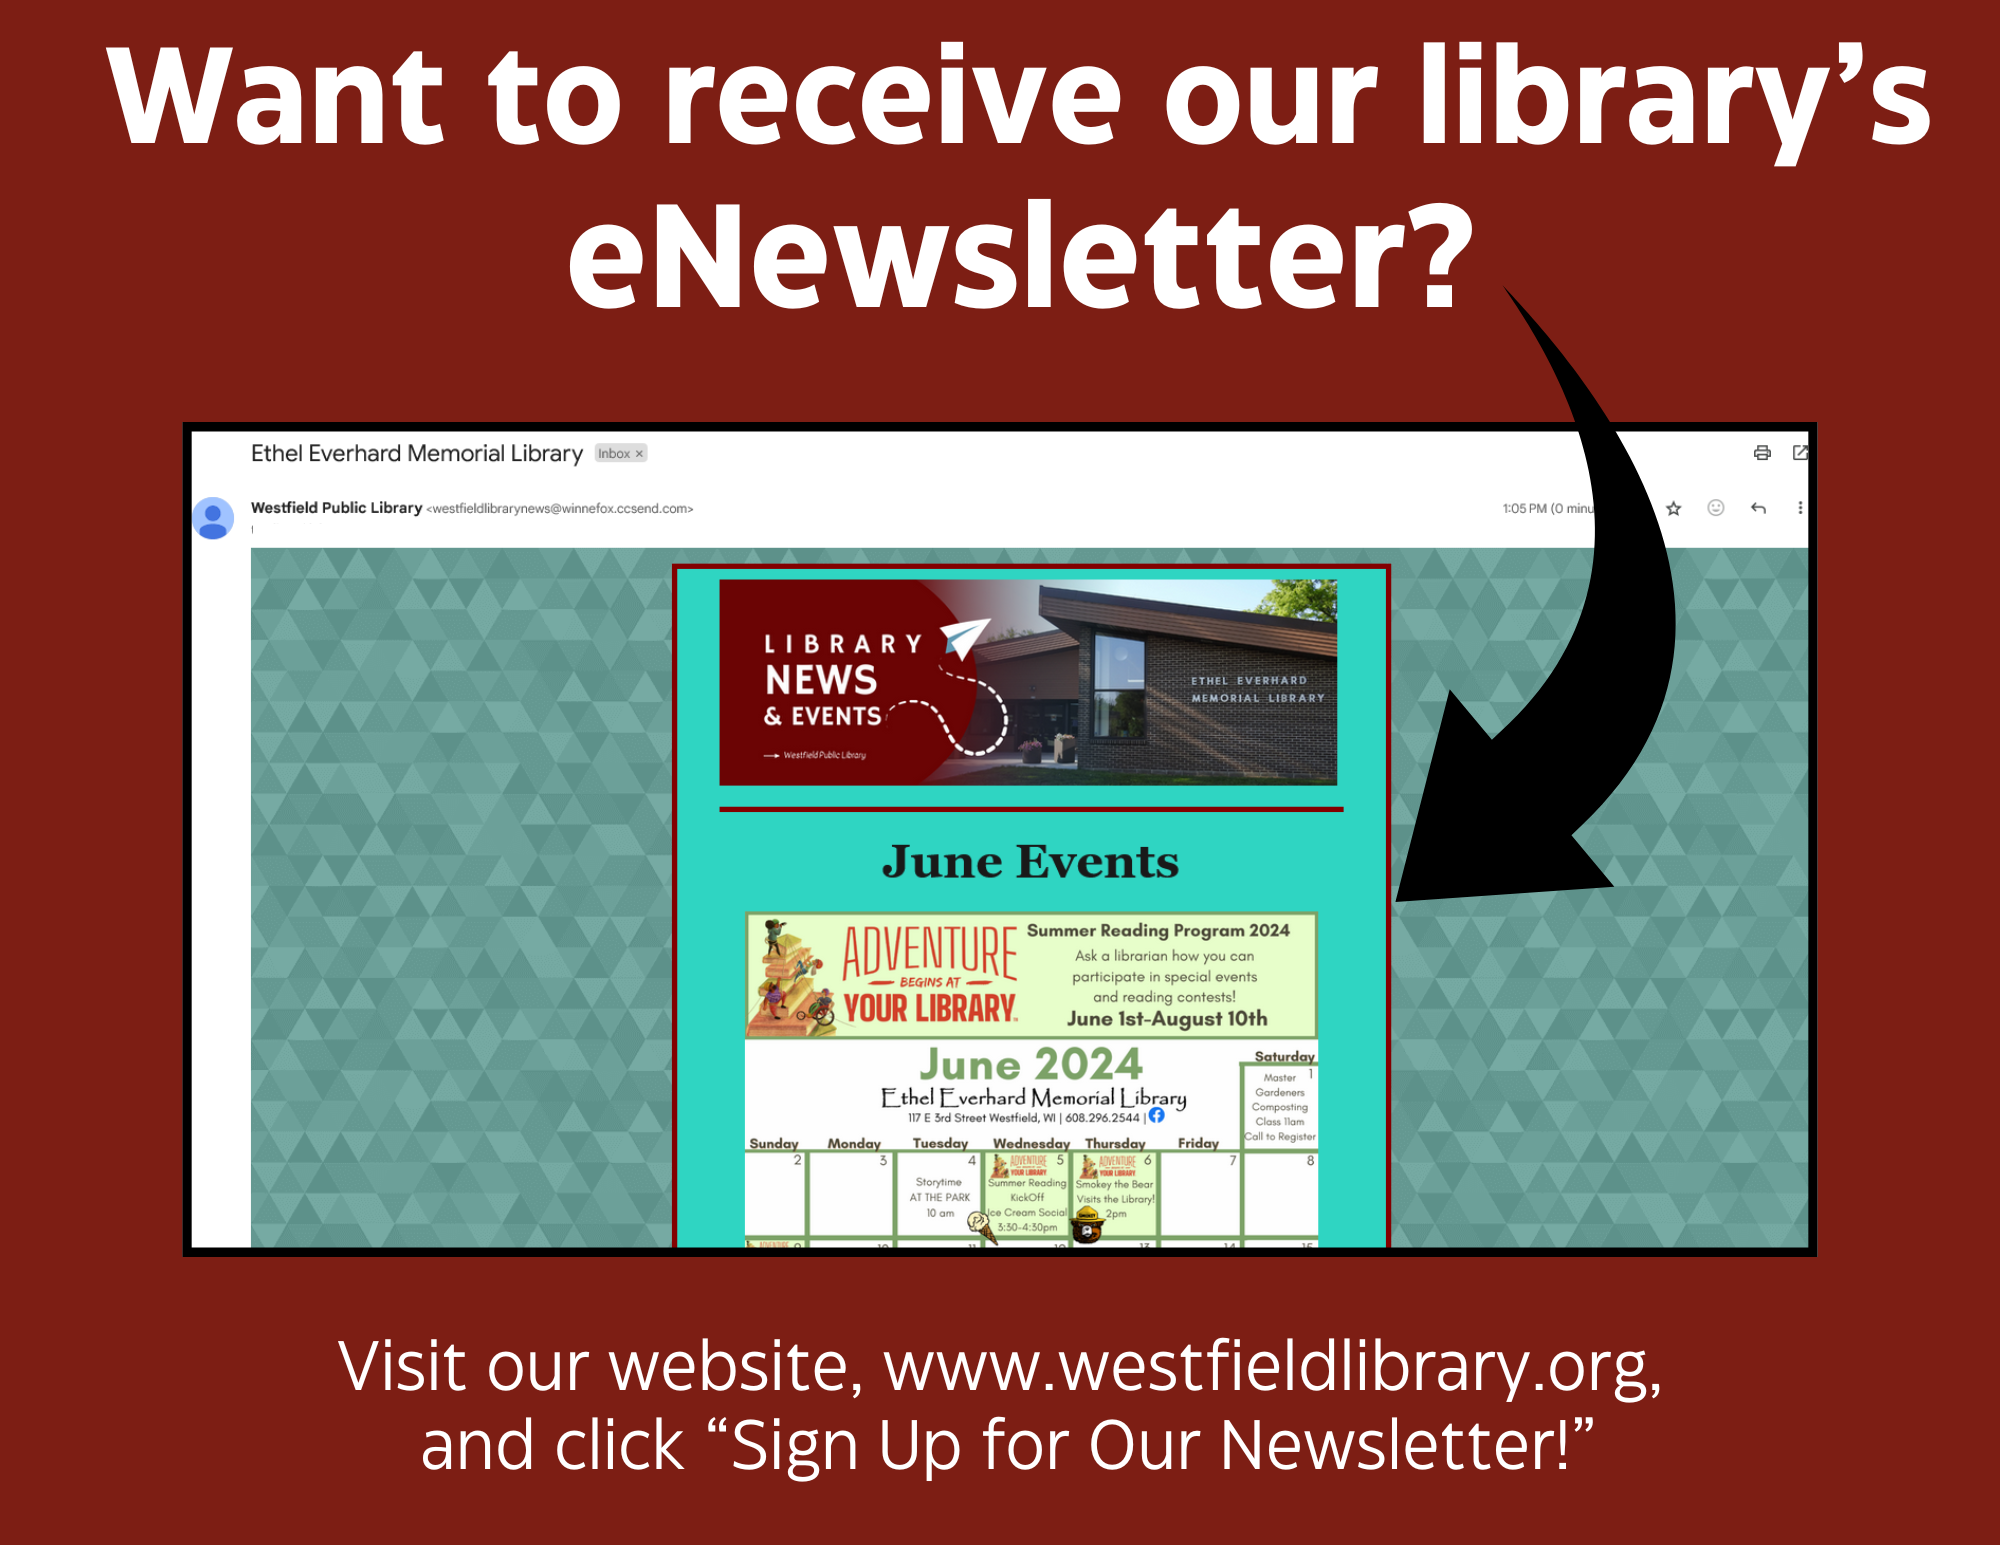 Sign Up for Our Newsletter!